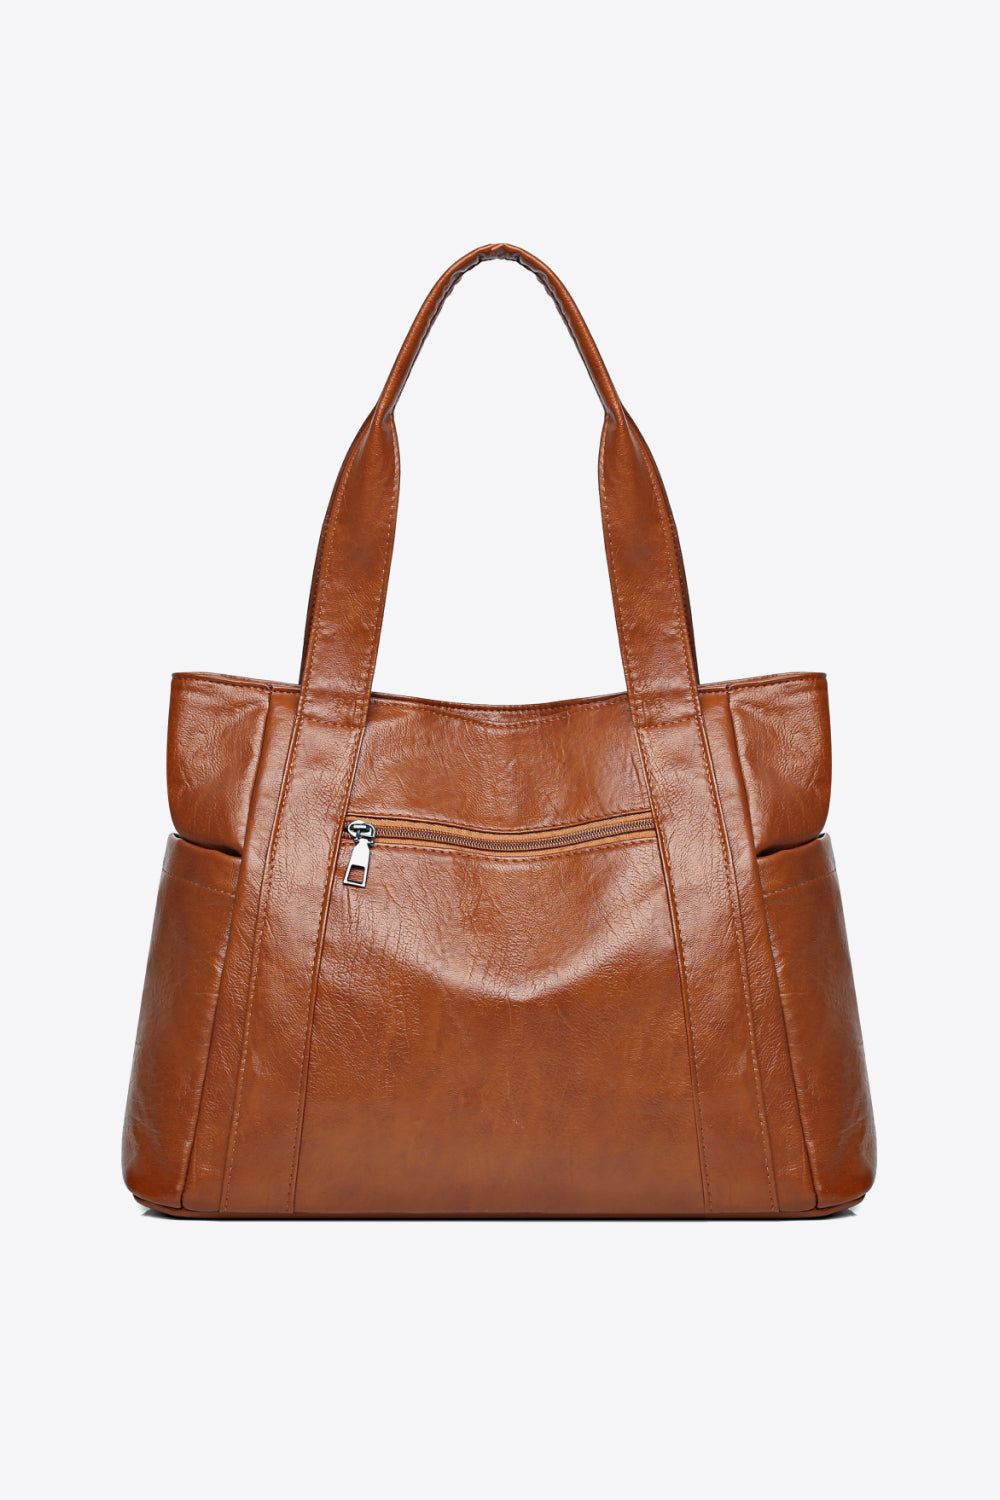 Tied Handbag with Lightweight Construction for Easy Carrying